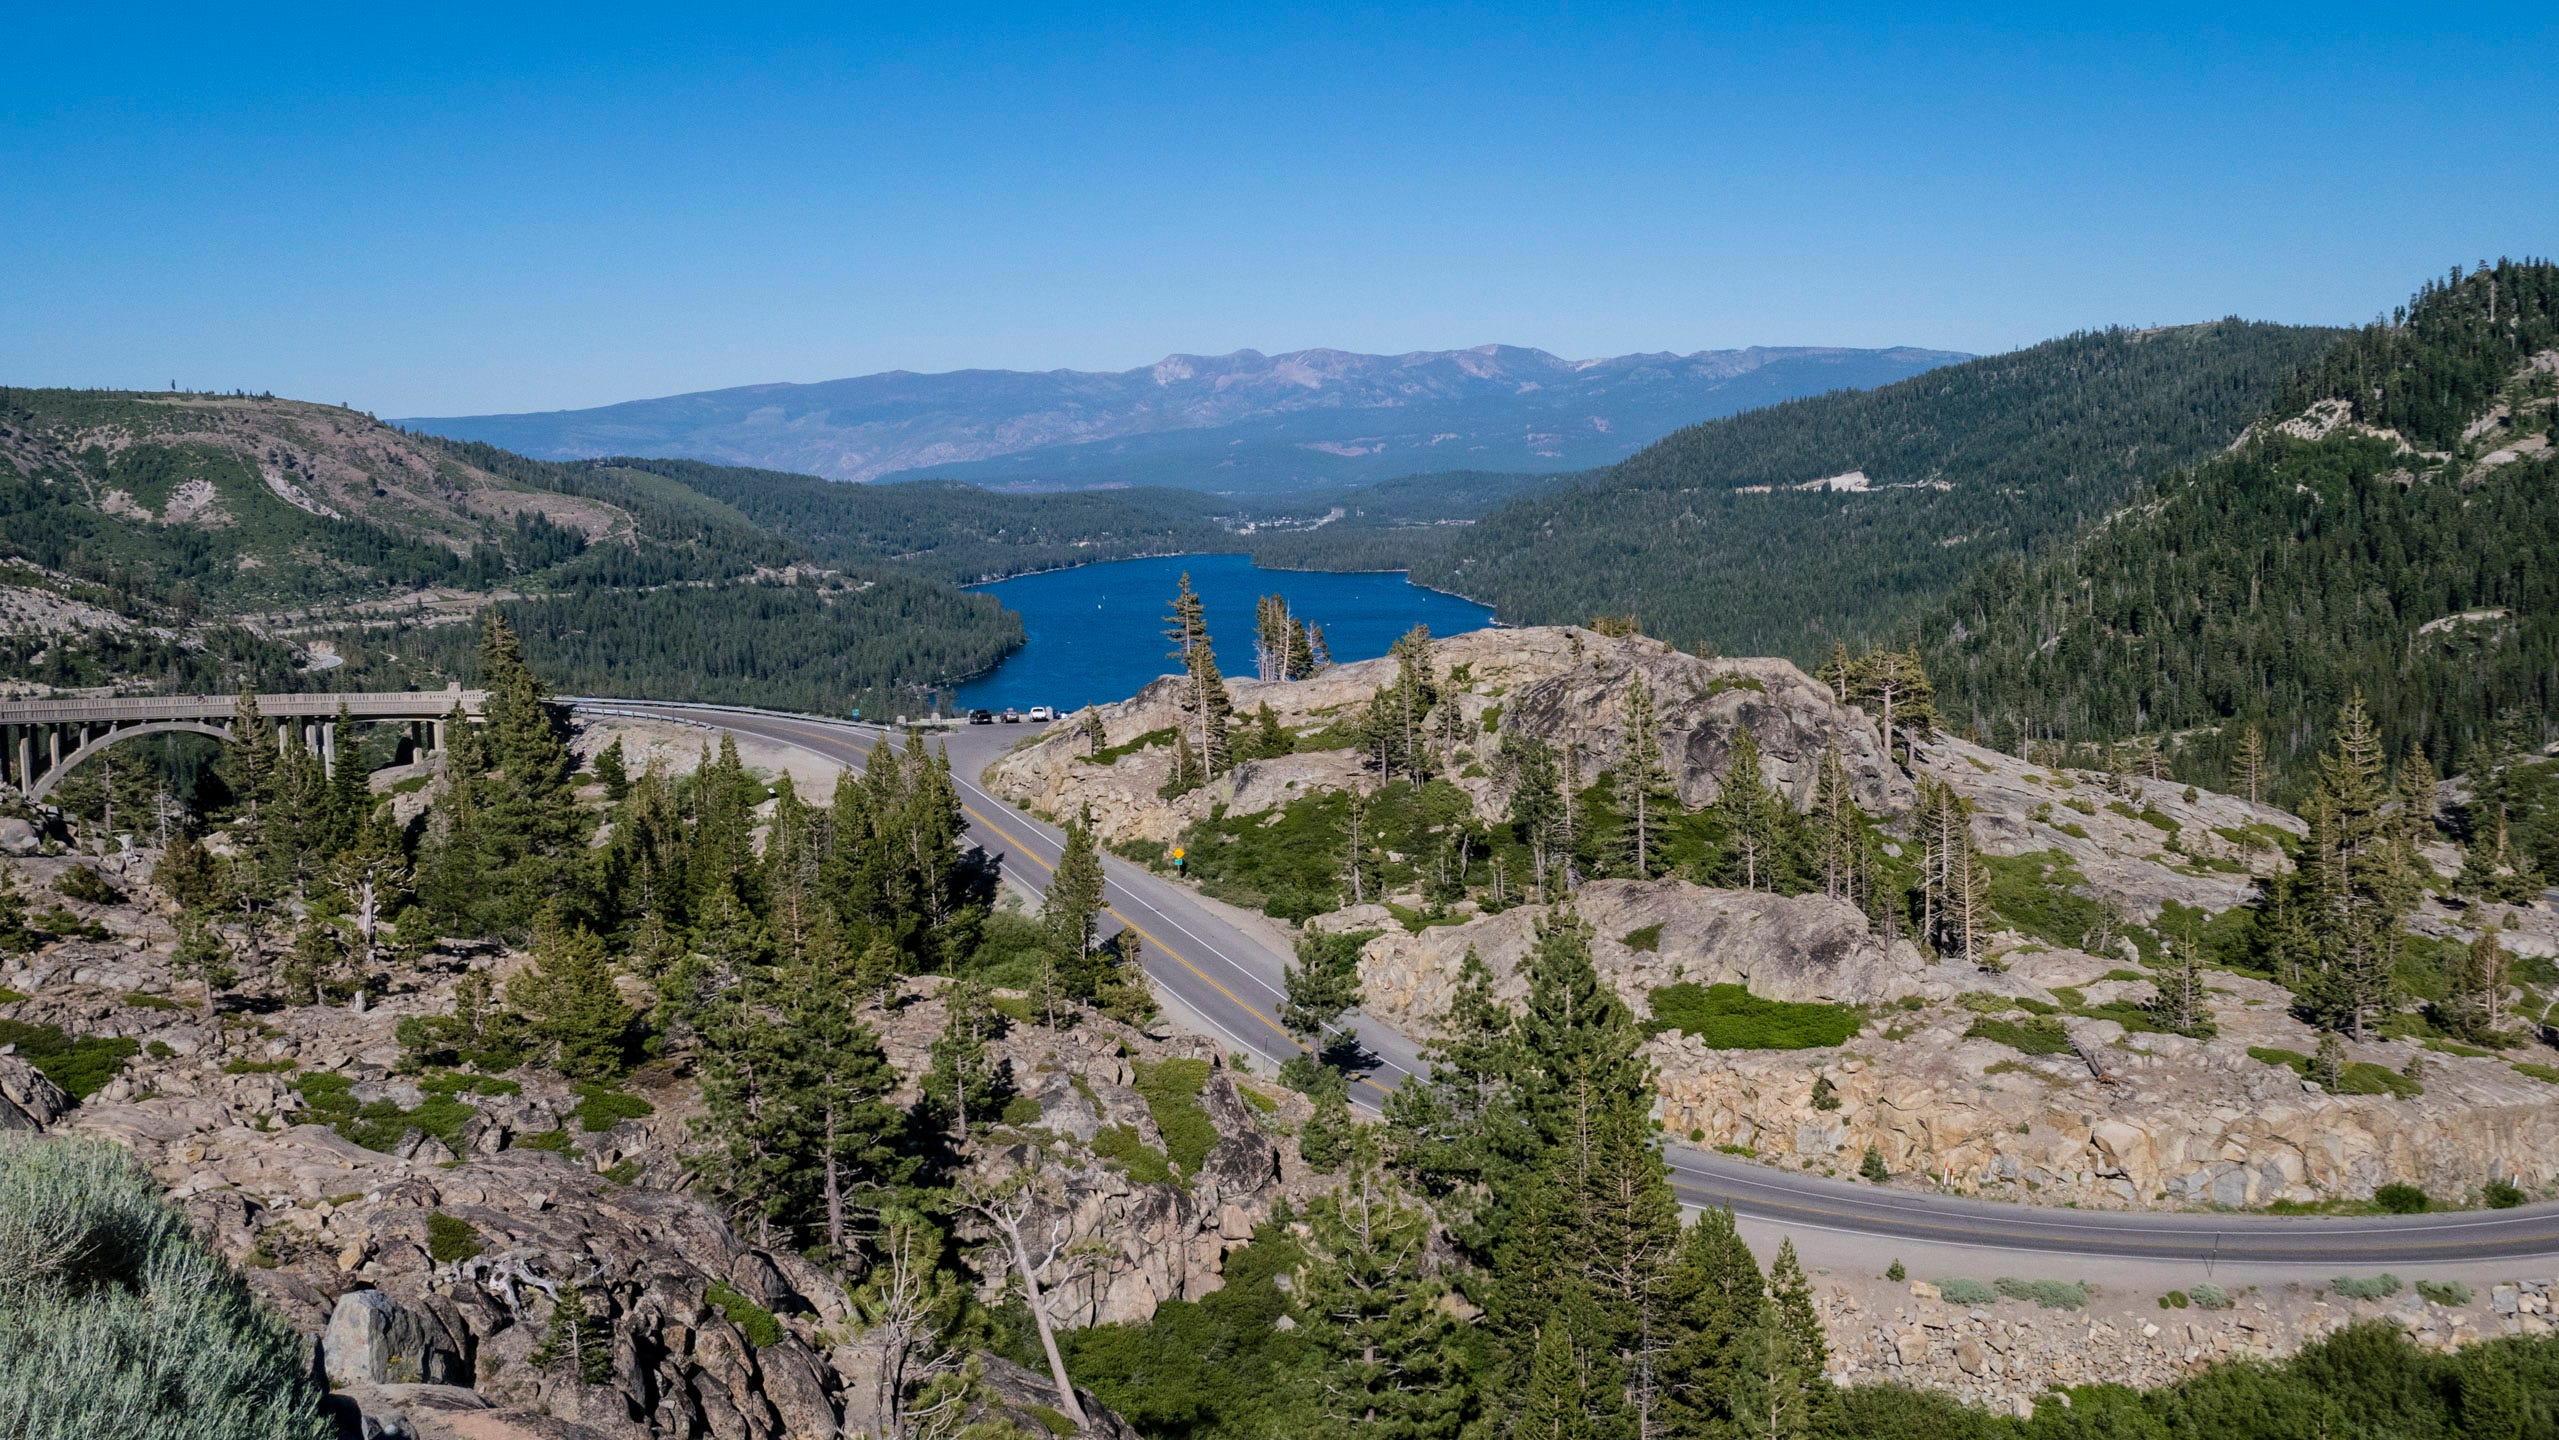 Panoramic photo looking east from Donner Pass towards a road that snakes downward among trees and rugged rock. Beyond is the deep blue of Donner Lake, surrounded by thick forests. Beyond that, in the hazy distance are more forests and the naked distant peaks of the Sierra Nevada Mountains. On the right, cutting through the forest, the grade of the Transcontinental Railroad can be seen.